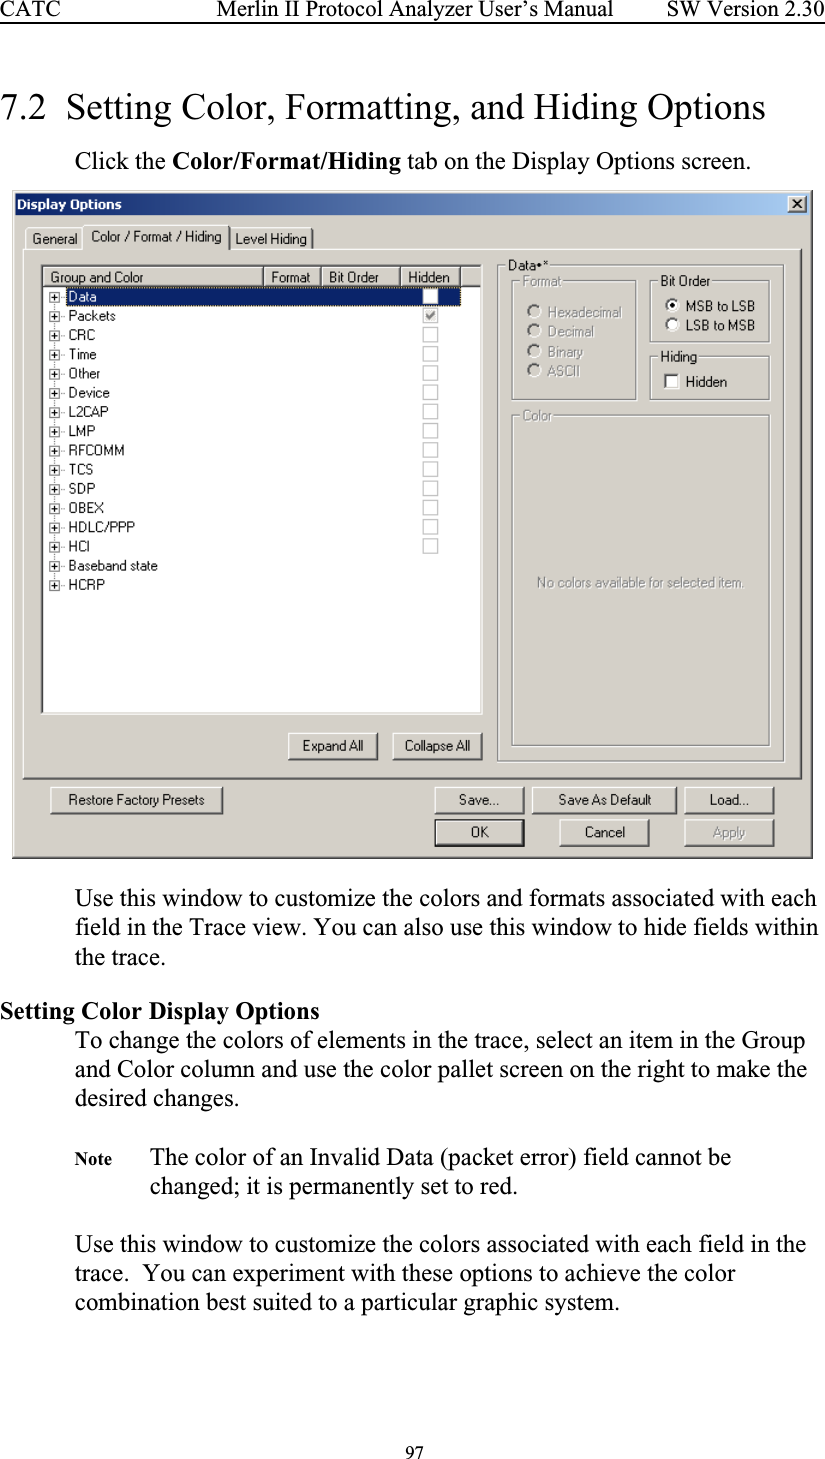  97 Merlin II Protocol Analyzer User’s ManualCATC SW Version 2.307.2  Setting Color, Formatting, and Hiding OptionsClick the Color/Format/Hiding tab on the Display Options screen.  Use this window to customize the colors and formats associated with each field in the Trace view. You can also use this window to hide fields within the trace.Setting Color Display Options To change the colors of elements in the trace, select an item in the Group and Color column and use the color pallet screen on the right to make the desired changes.Note The color of an Invalid Data (packet error) field cannot be changed; it is permanently set to red.Use this window to customize the colors associated with each field in the trace.  You can experiment with these options to achieve the color combination best suited to a particular graphic system.